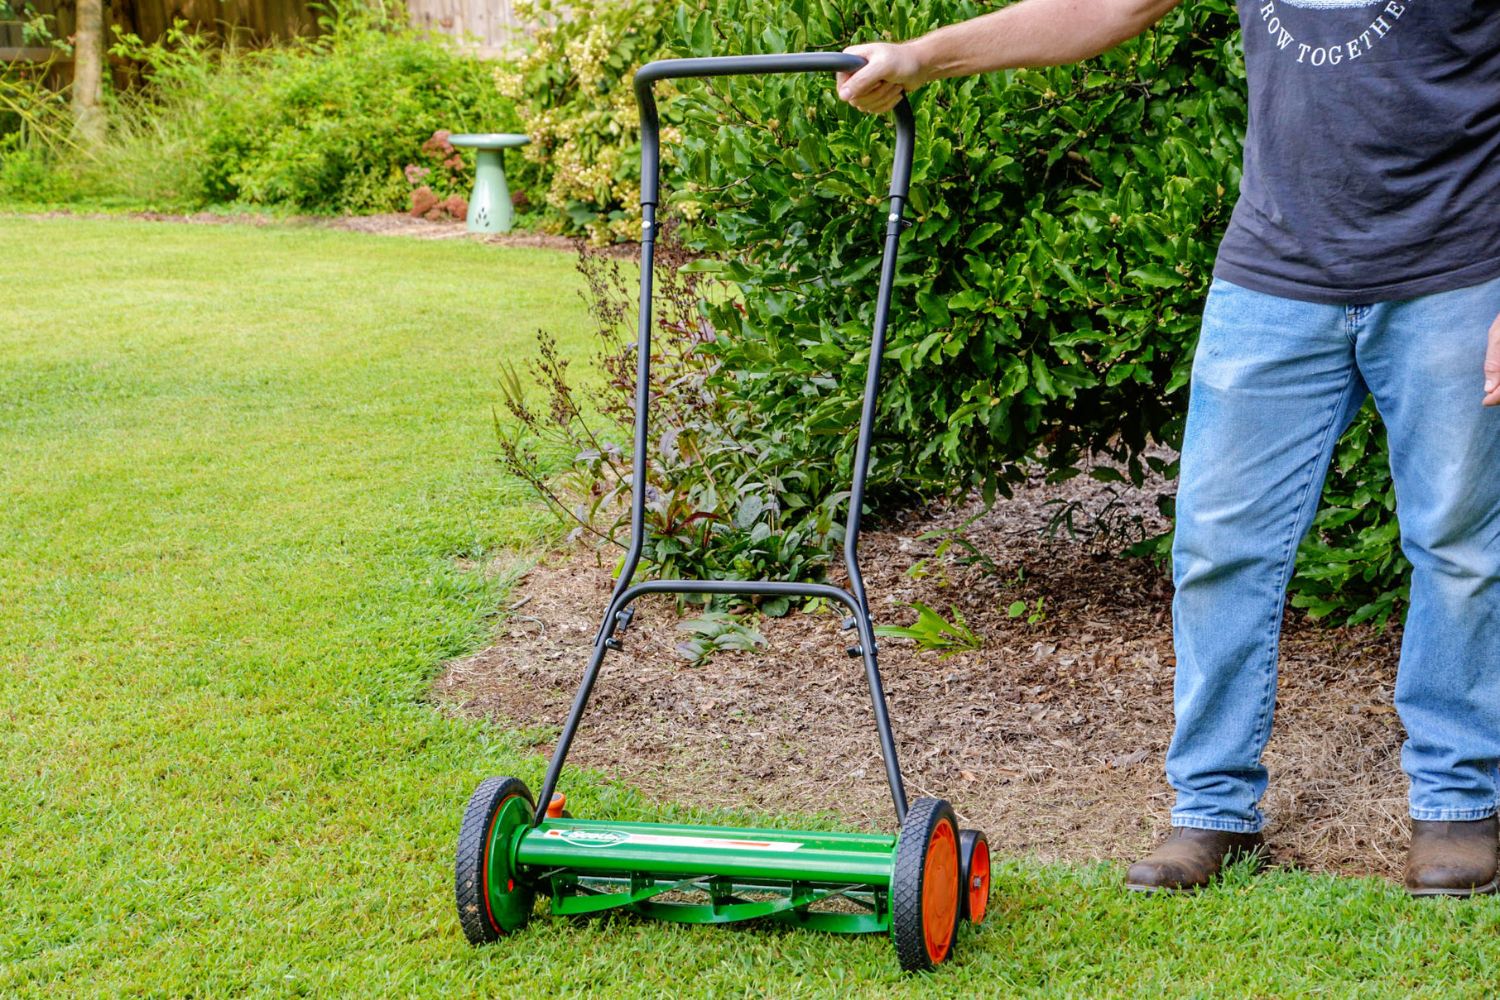 How to Assemble and Adjust Scotts 18-Inch 7-Blade Push REEL Mower